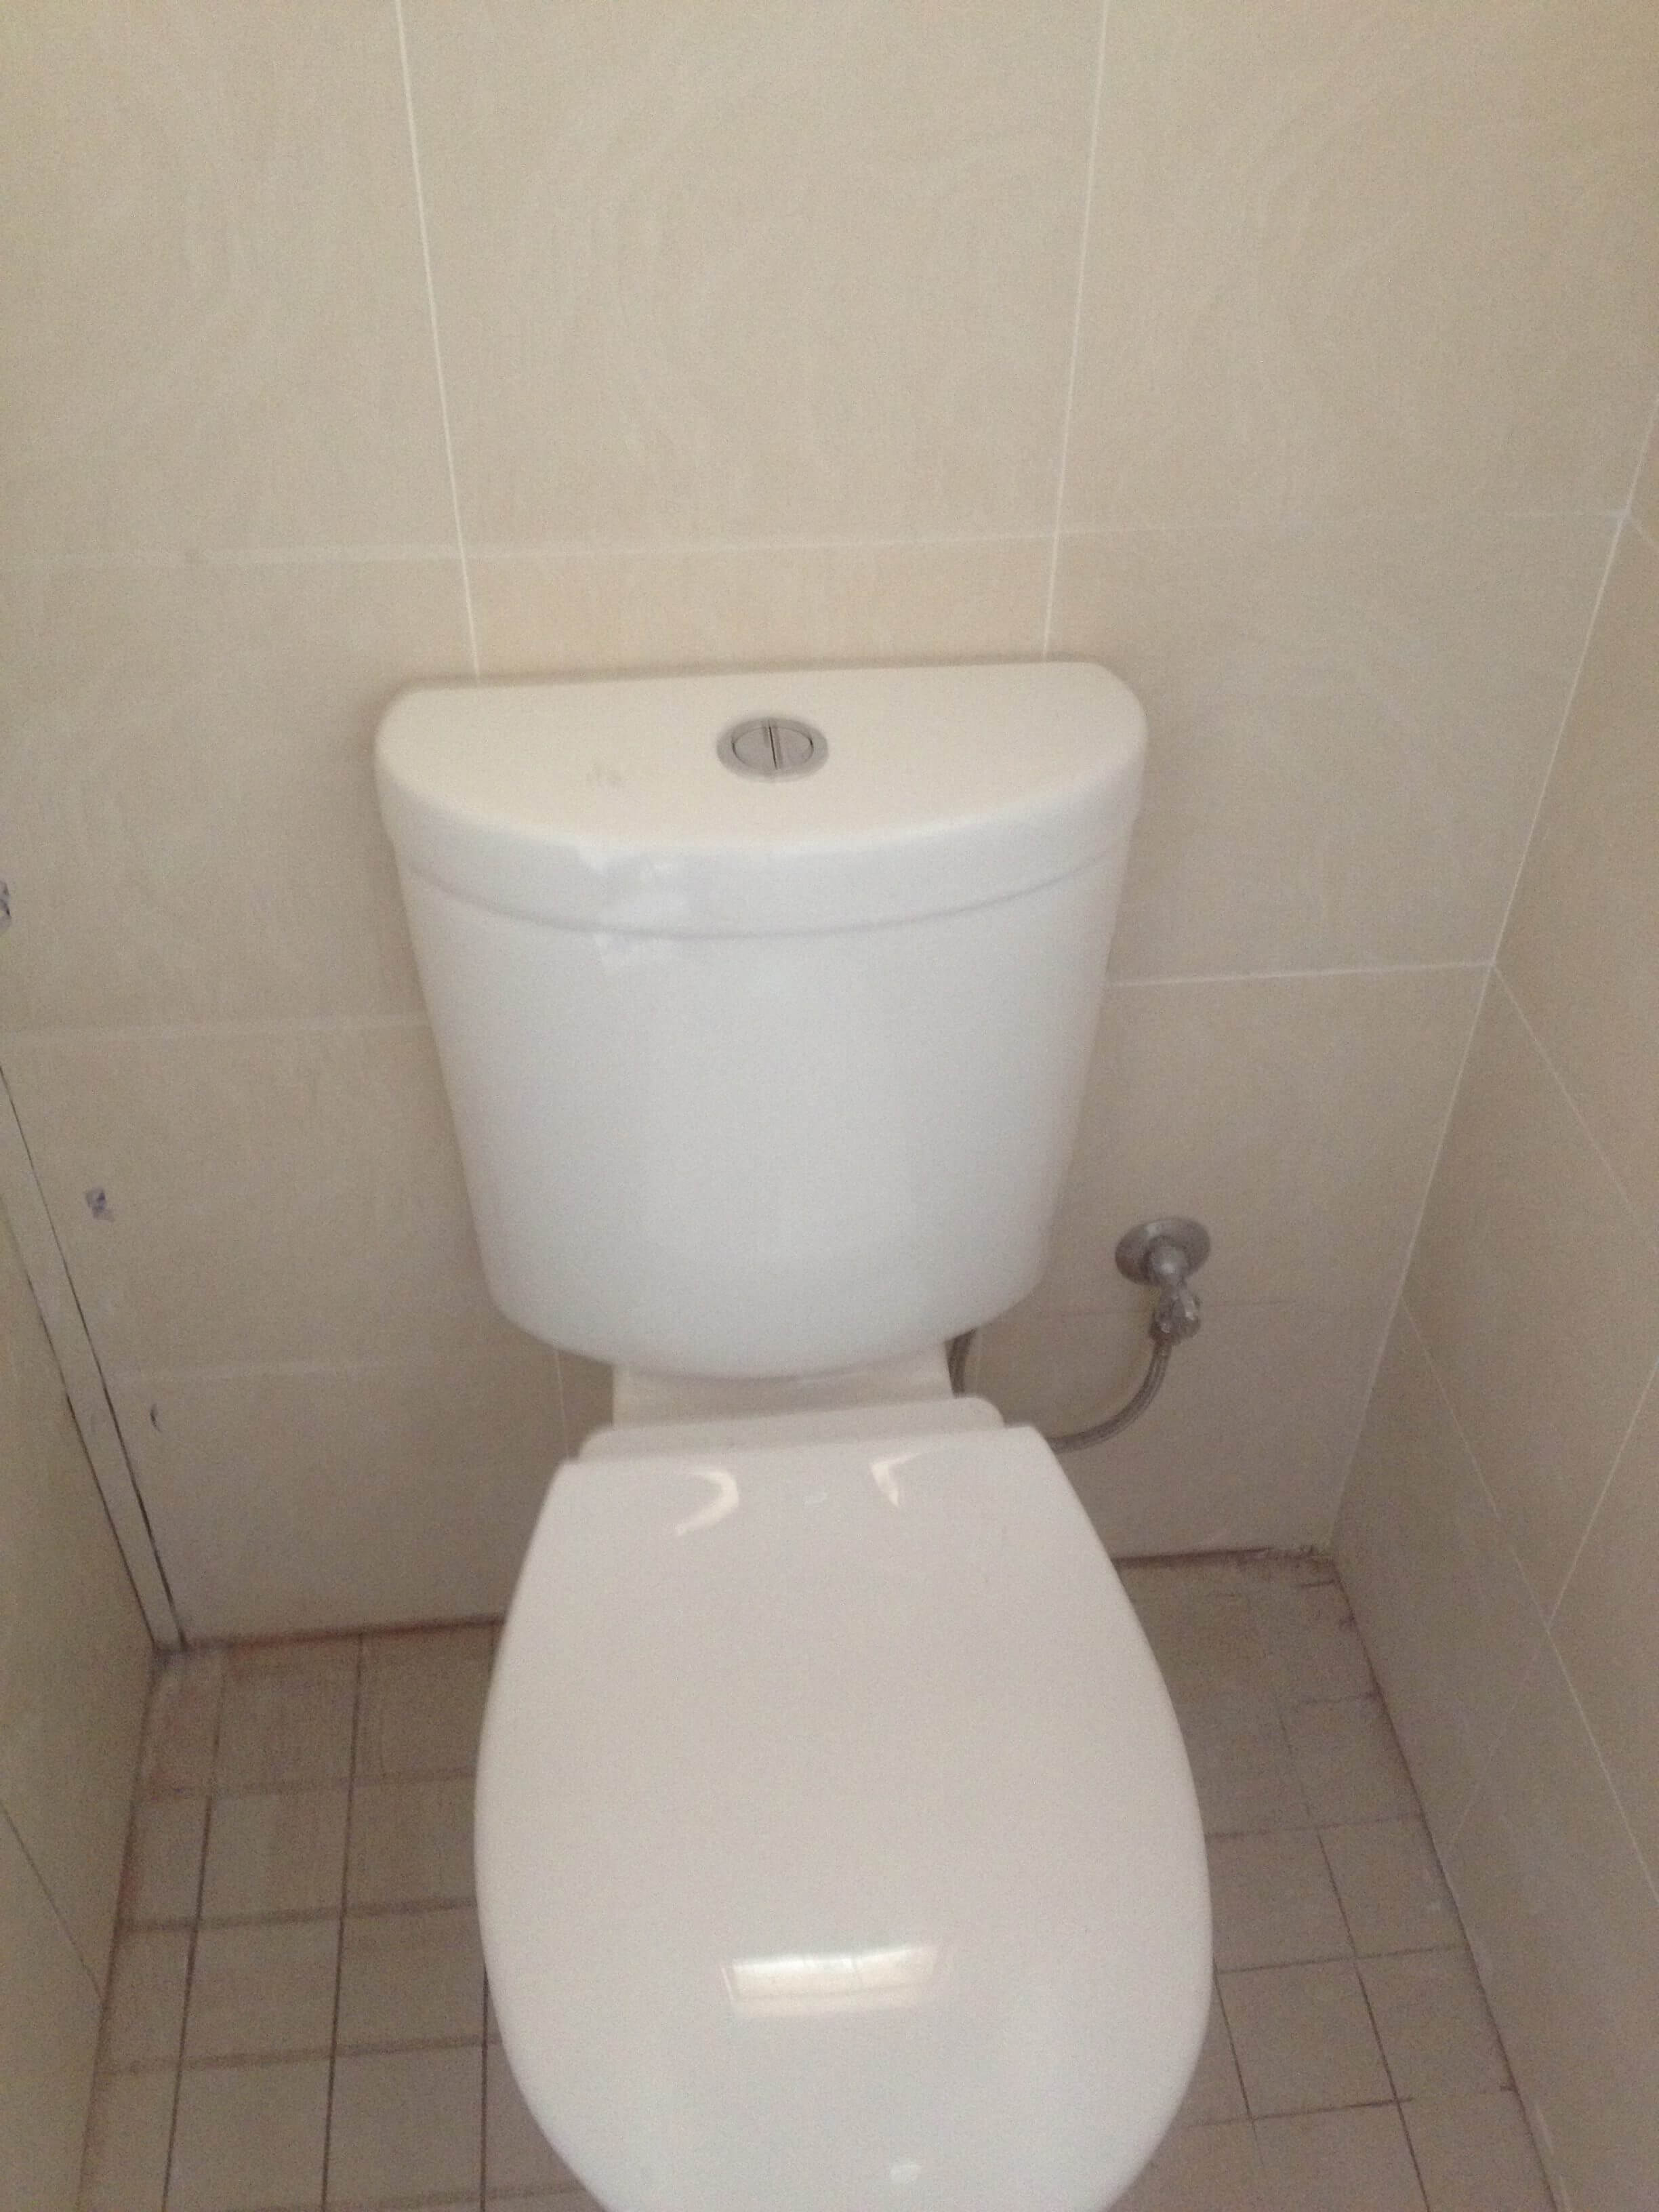 Everyday Plumbers Plumbing Fittings and Sanitary Fixtures - Bathroom Toilet and Bowl 2455